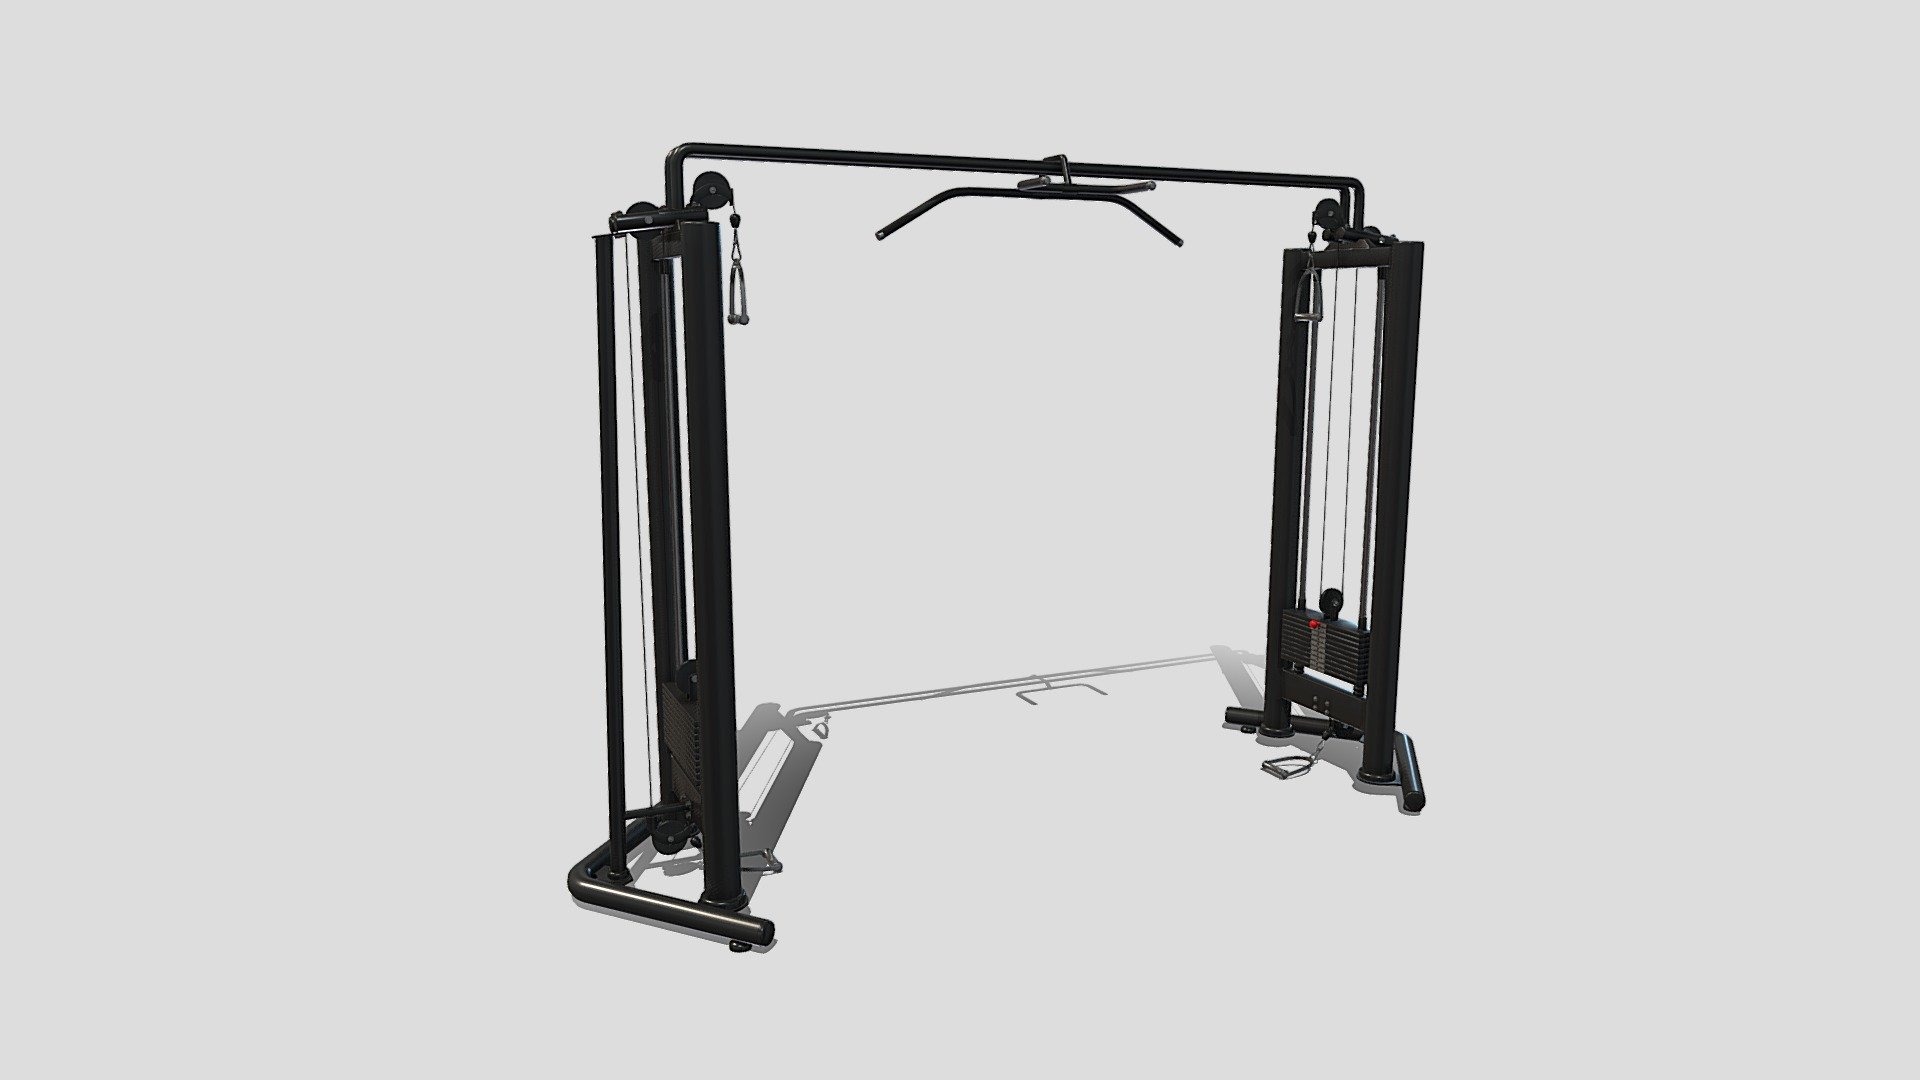 Gym machine 3d model built to real size, rendered with Cycles in Blender, as per seen on attached images. 

File formats:
-.blend, rendered with cycles, as seen in the images;
-.obj, with materials applied;
-.dae, with materials applied;
-.fbx, with materials applied;
-.stl;

Files come named appropriately and split by file format.

3D Software:
The 3D model was originally created in Blender 3.1 and rendered with Cycles.

Materials and textures:
The models have materials applied in all formats, and are ready to import and render.
Materials are image based using PBR, the model comes with four 4k png image textures.

Preview scenes:
The preview images are rendered in Blender using its built-in render engine &lsquo;Cycles'.
Note that the blend files come directly with the rendering scene included and the render command will generate the exact result as seen in previews.

General:
The models are built mostly out of quads.

For any problems please feel free to contact me.

Don't forget to rate and enjoy! - Cable Crossover - Buy Royalty Free 3D model by dragosburian 3d model